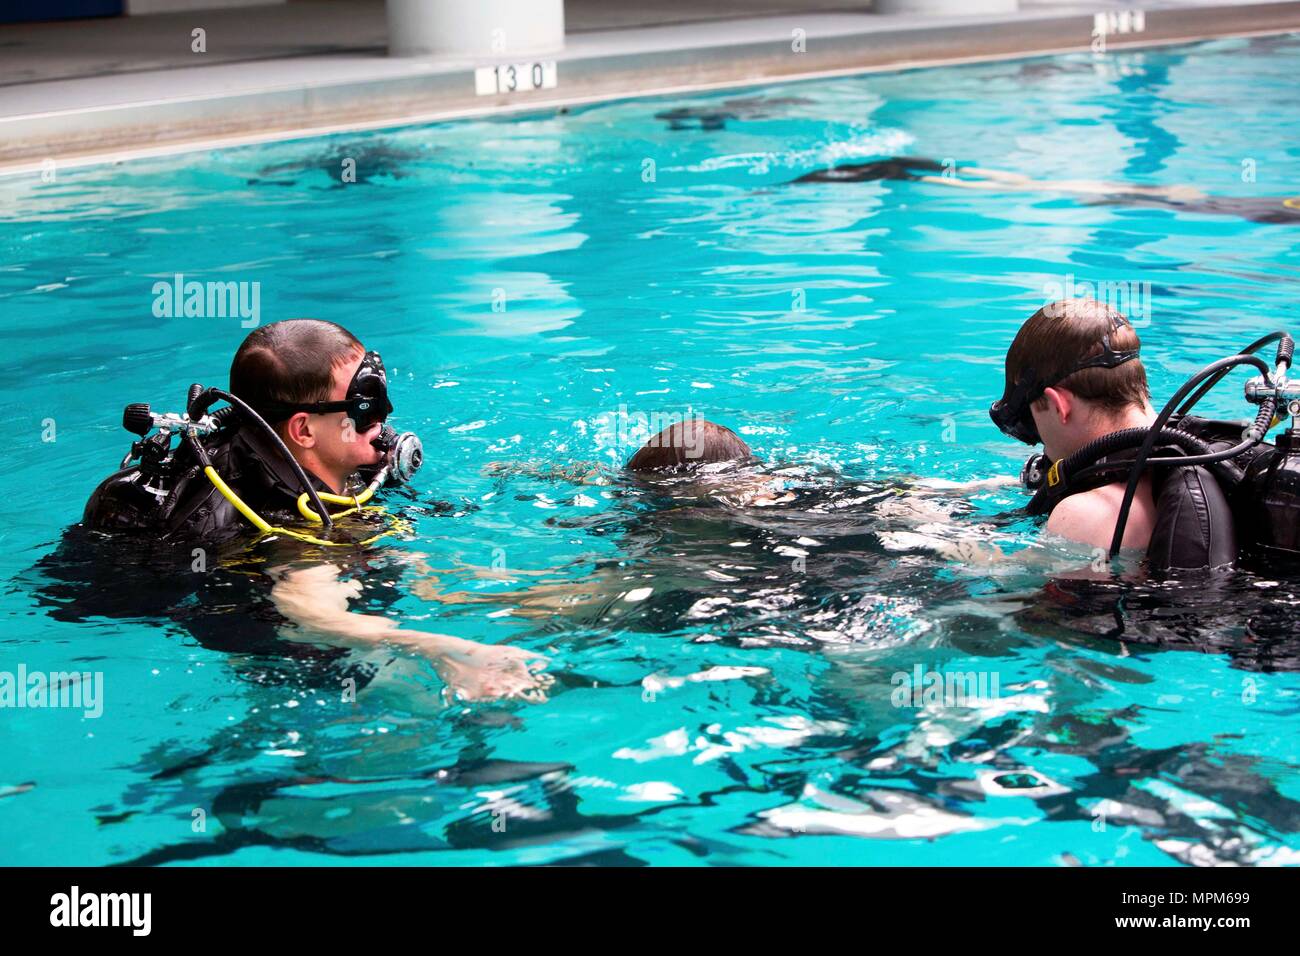 Marines conduct dive training in small groups to ensure safety in the pool during a battalion training event at Camp Lejeune, N.C., March 23, 2017. The Marines conducted training with the self-contained underwater breathing apparatus to maintain proficiency and confidence in their combat diving skills. The Marines are with 2nd Reconnaissance Battalion, 2nd Marine Division. (U.S. Marine Corps photo by Sgt. Clemente C. Garcia) Stock Photo